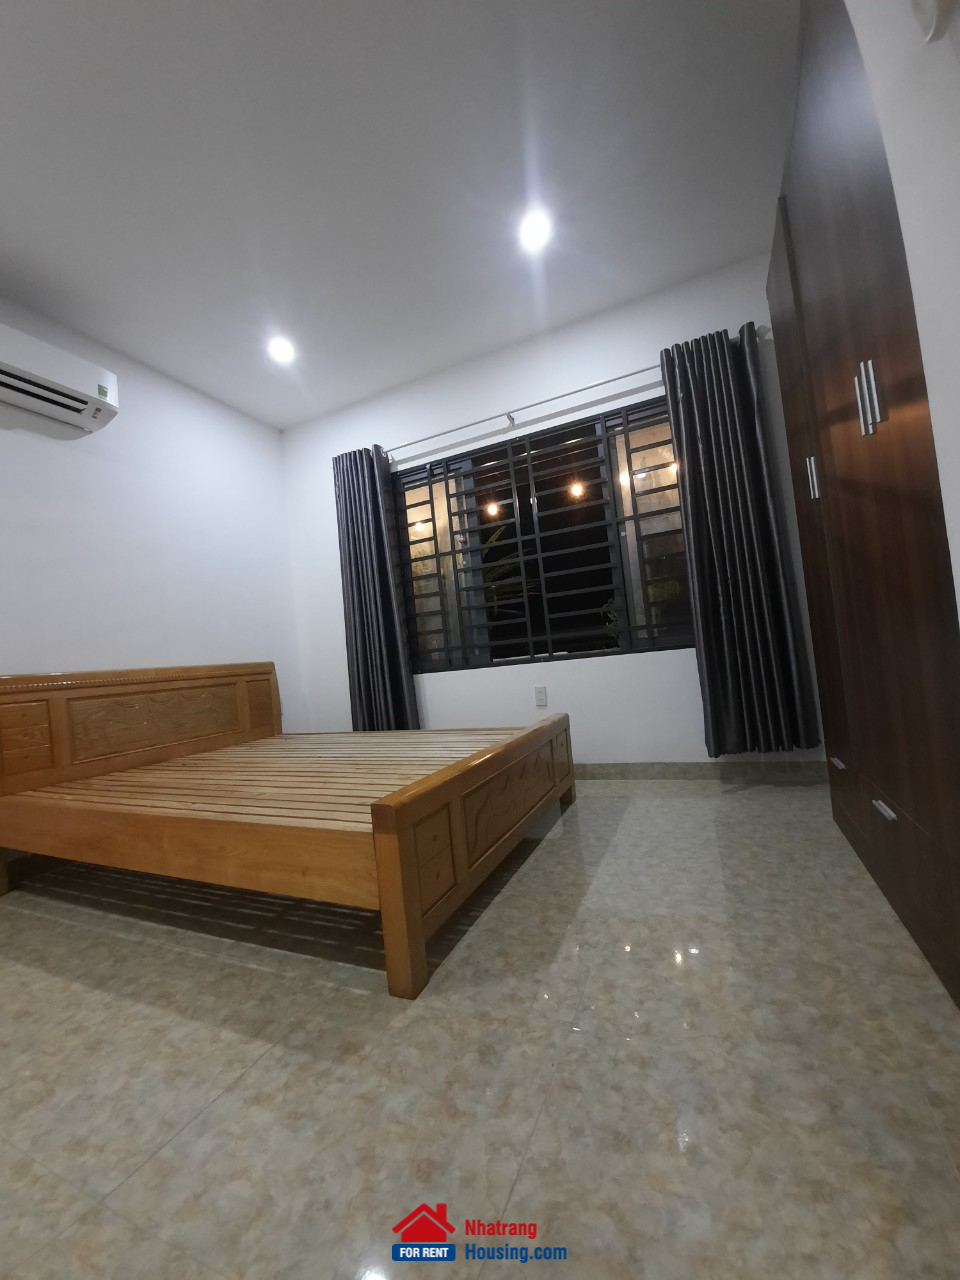 House for rent in Nha Trang. The house is located on Co Tien mountain, seaview and cityview